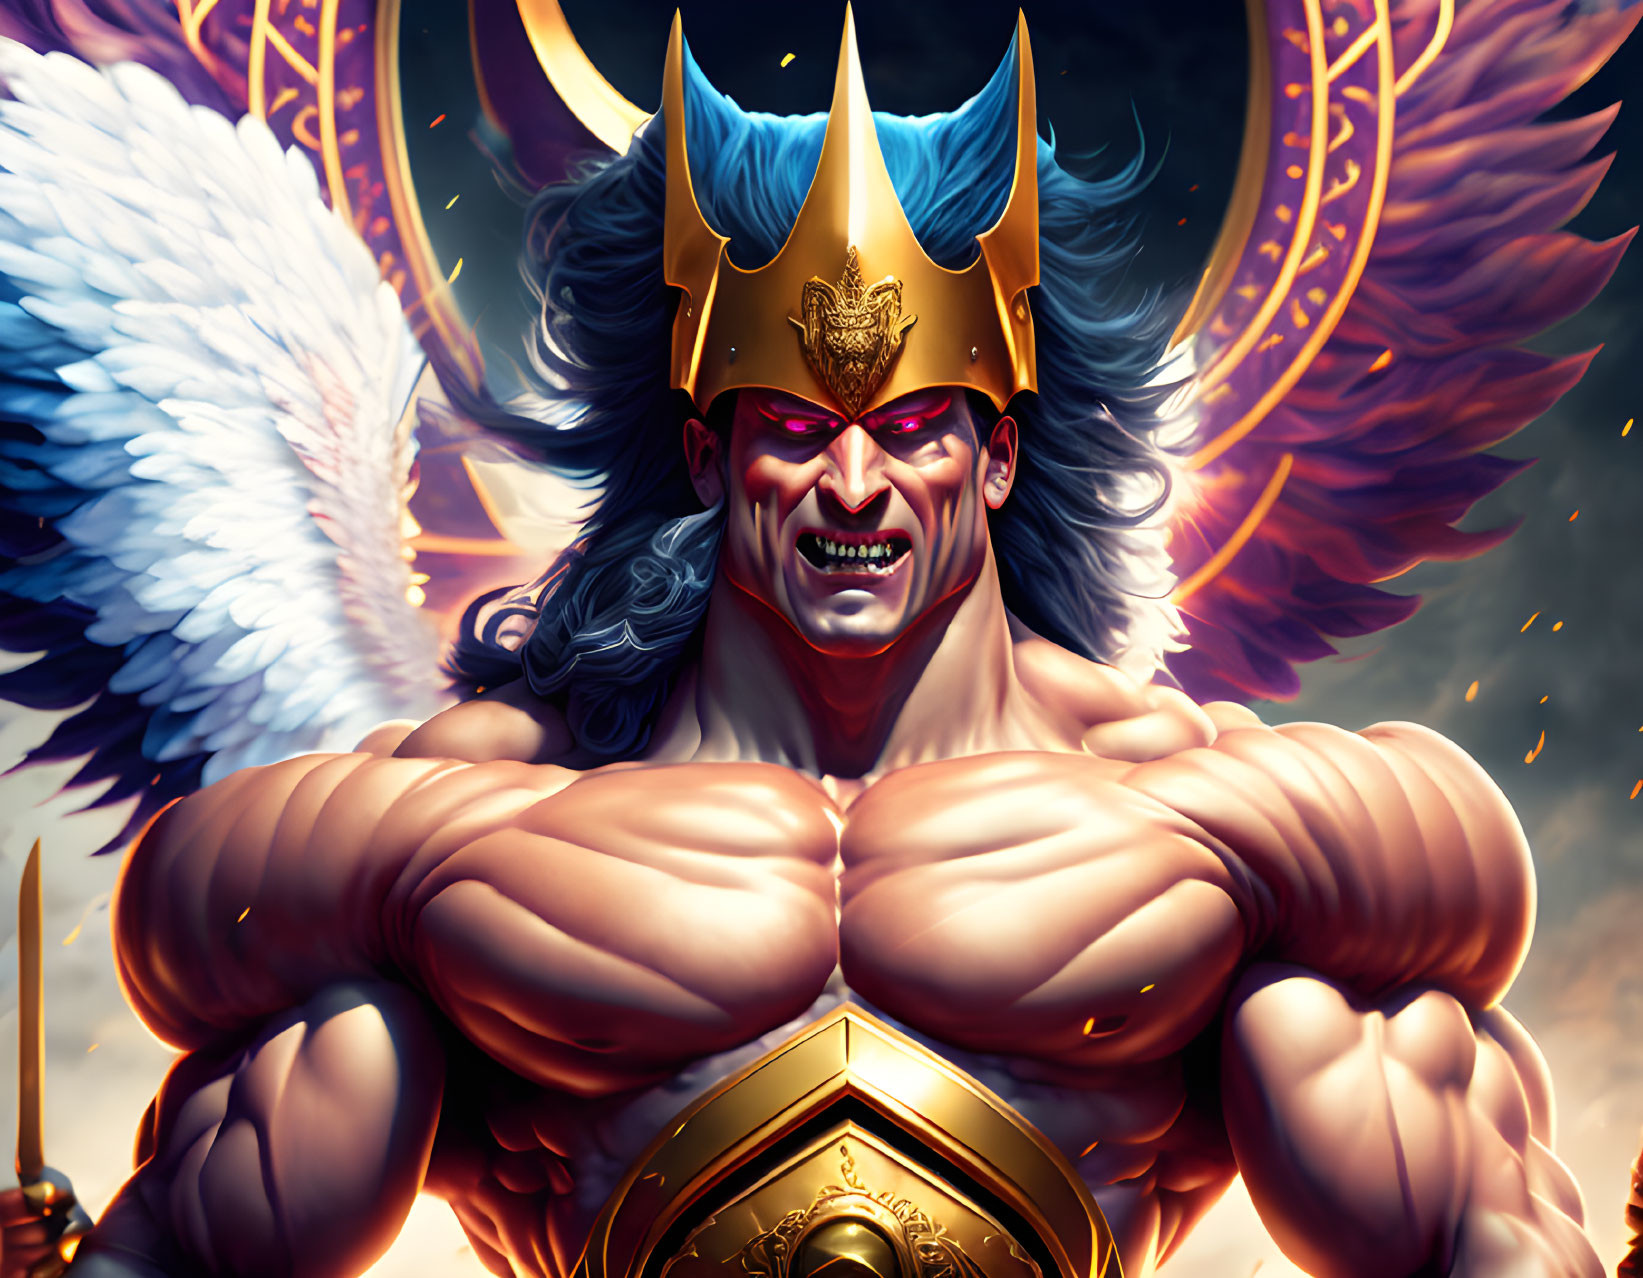 Muscular character with golden helmet and angelic wing illustration